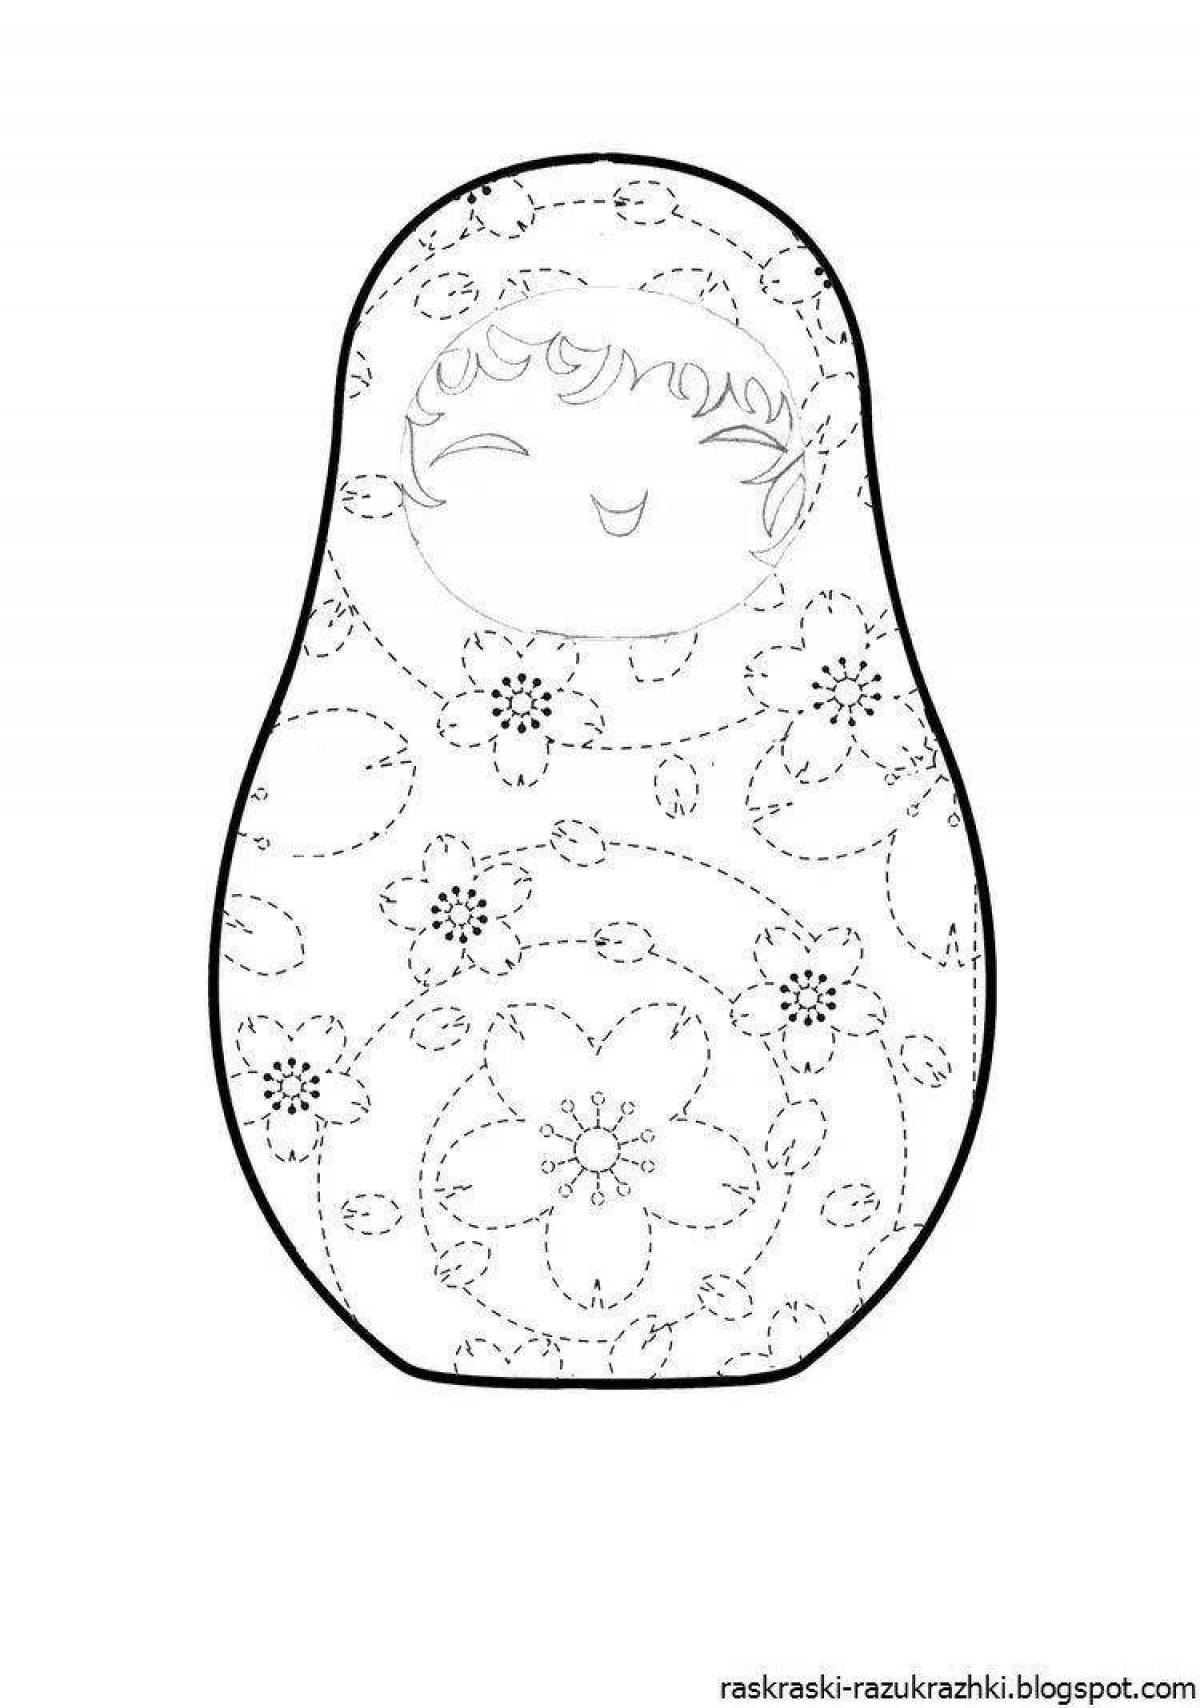 Coloring book with a bright pattern of nesting dolls